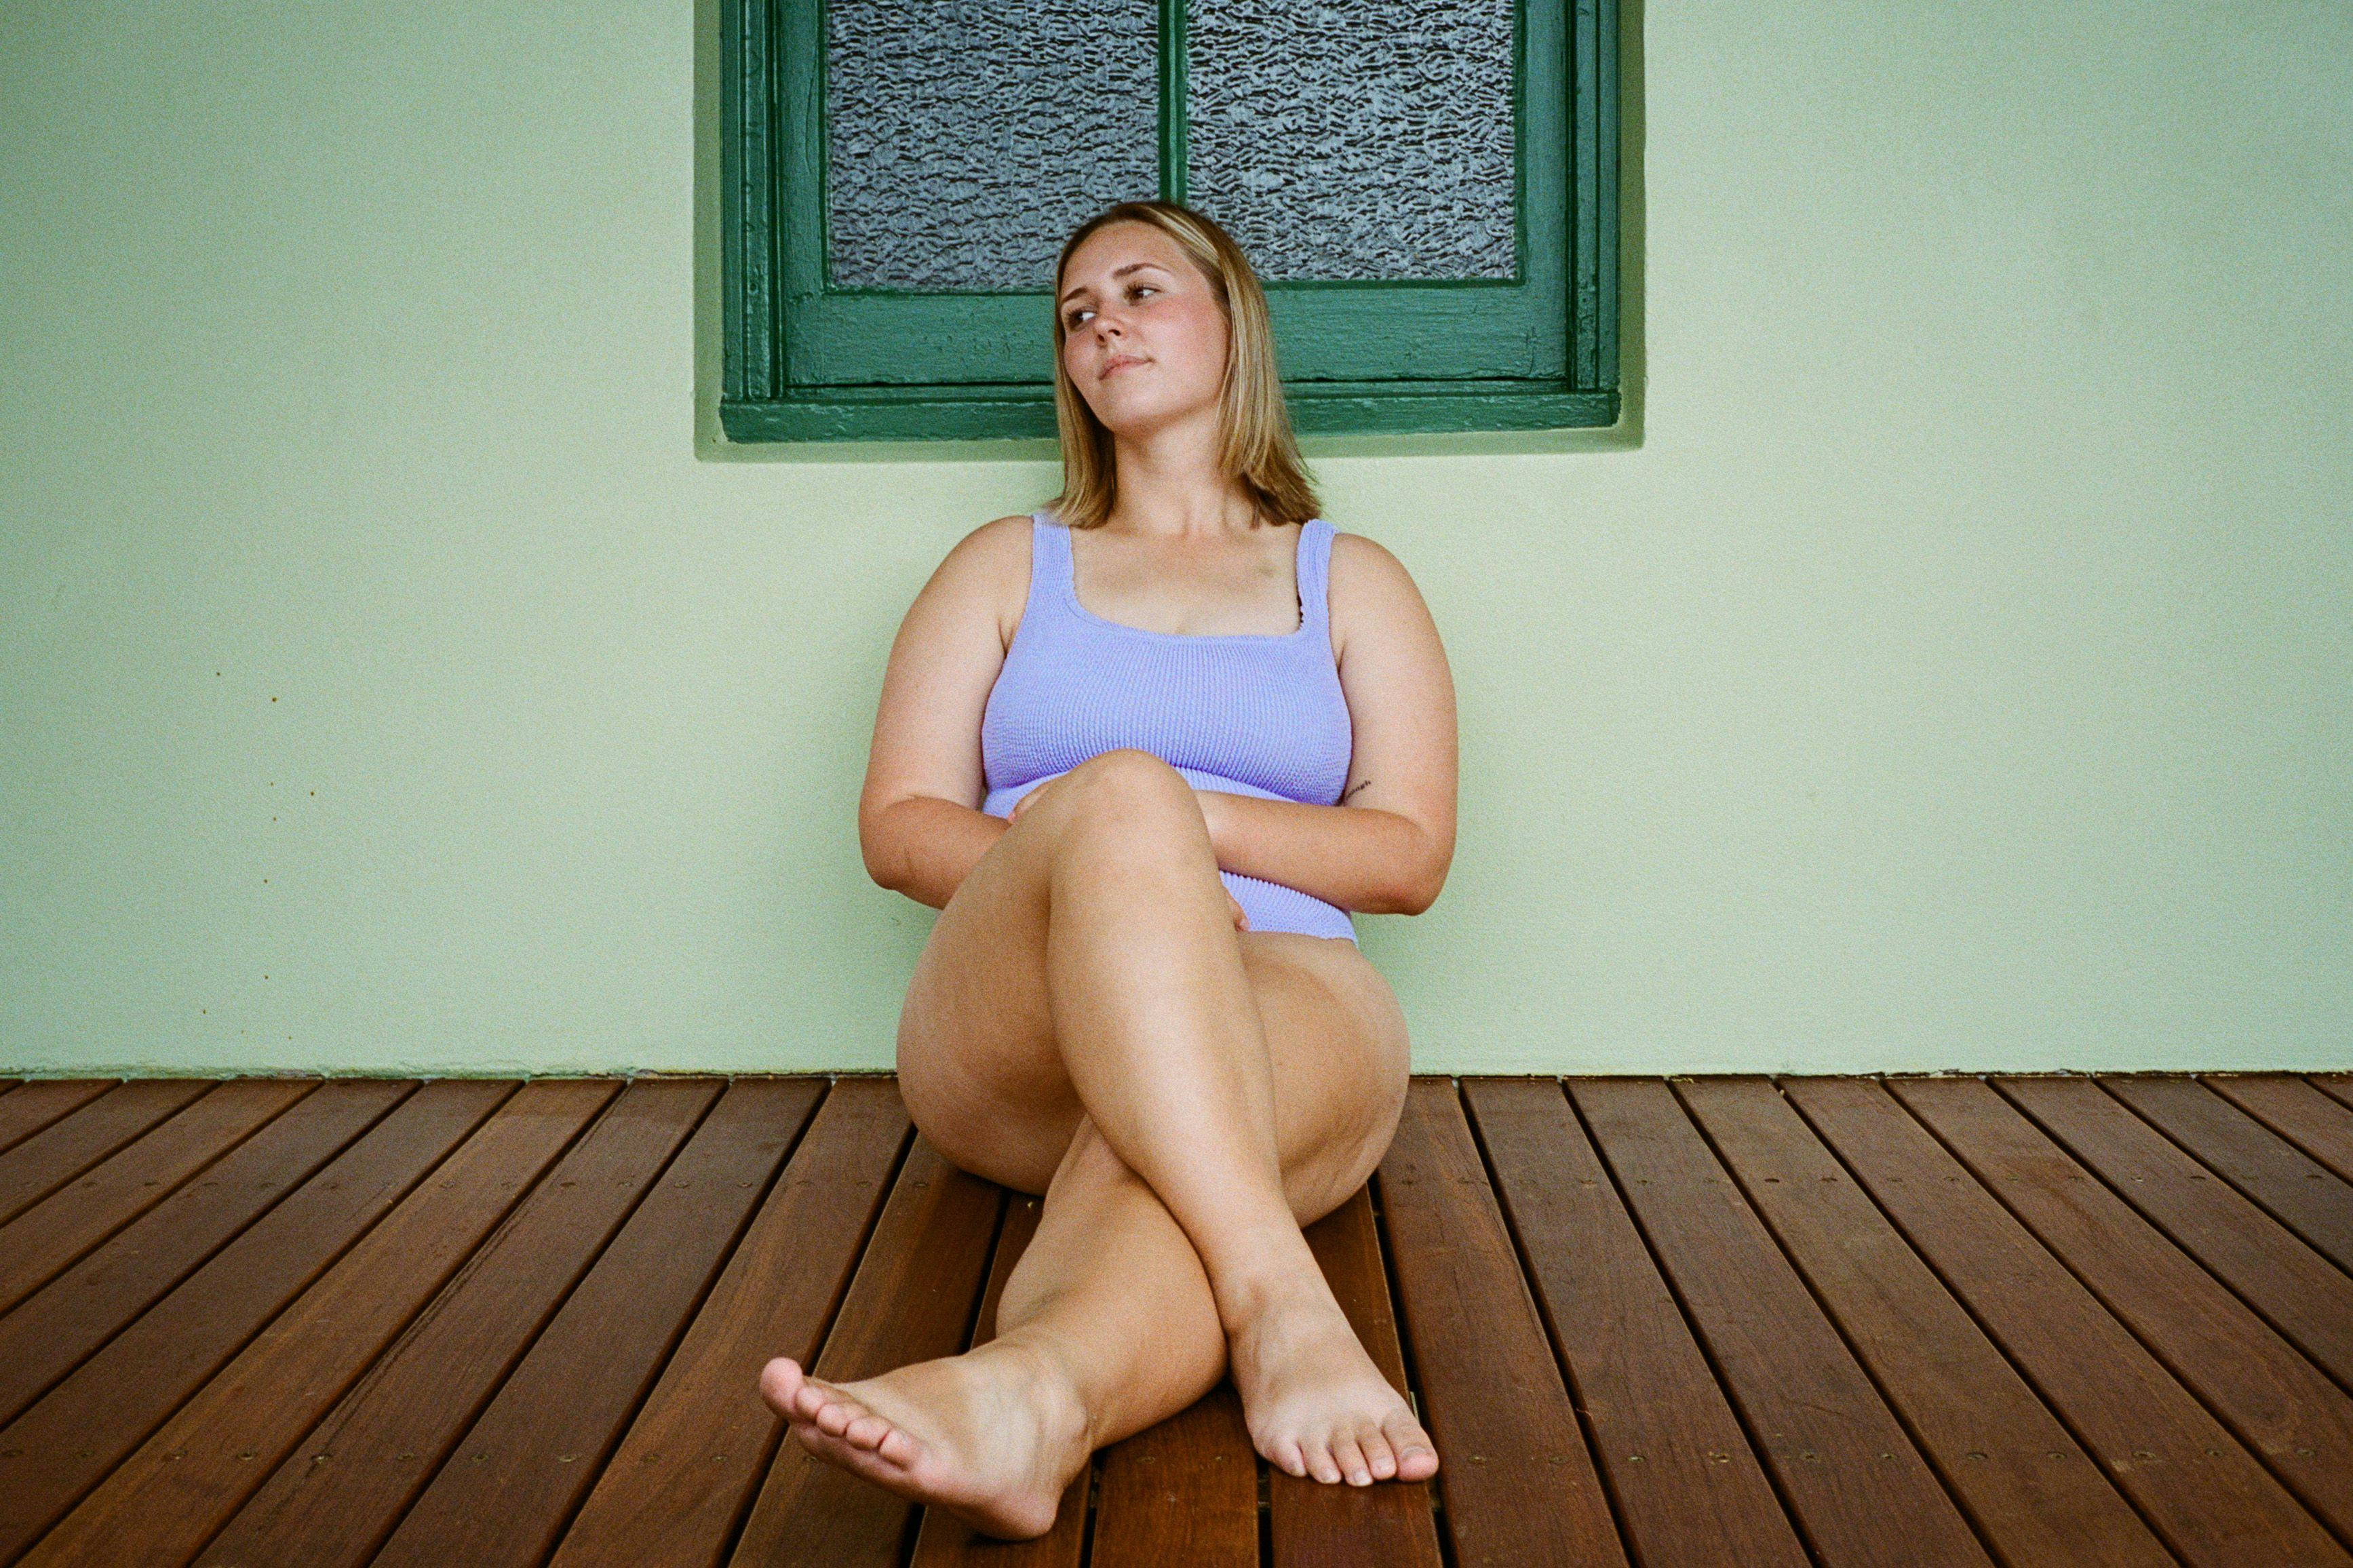 Piper sitting on a deck in a purple swimsuit.